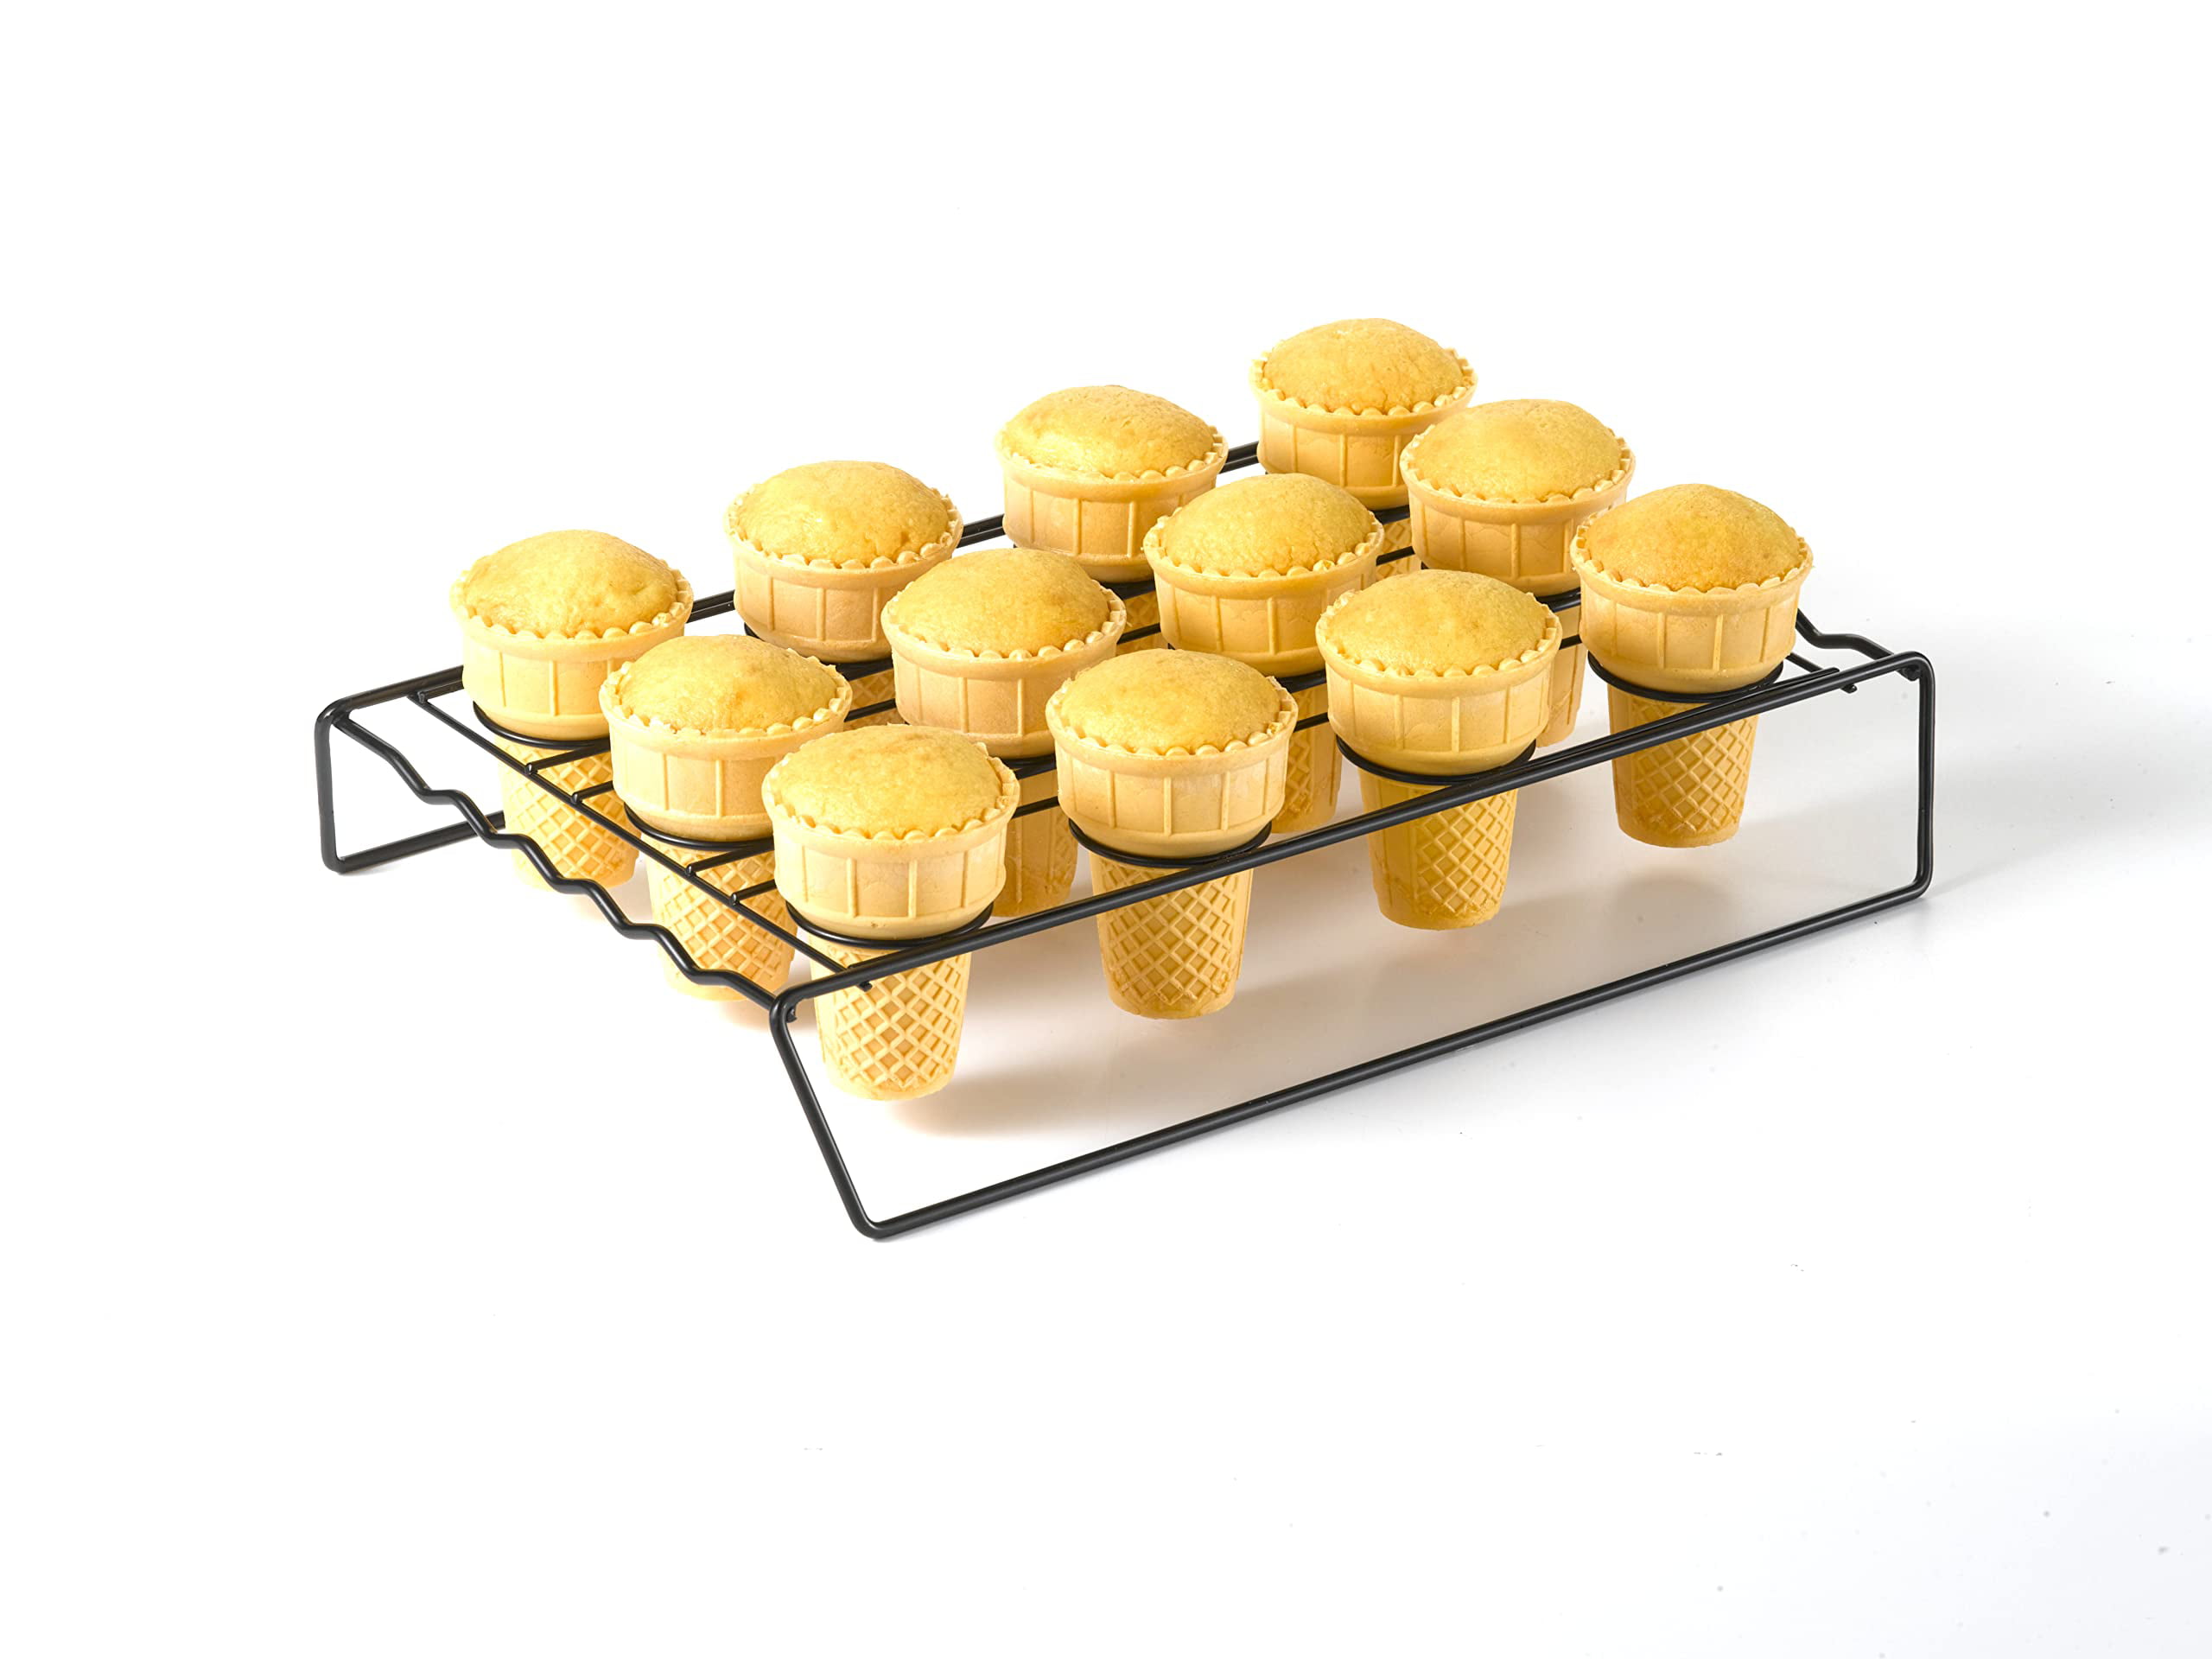  Nifty Cookie & Baking Sheets (Set of 3) – Non-Stick